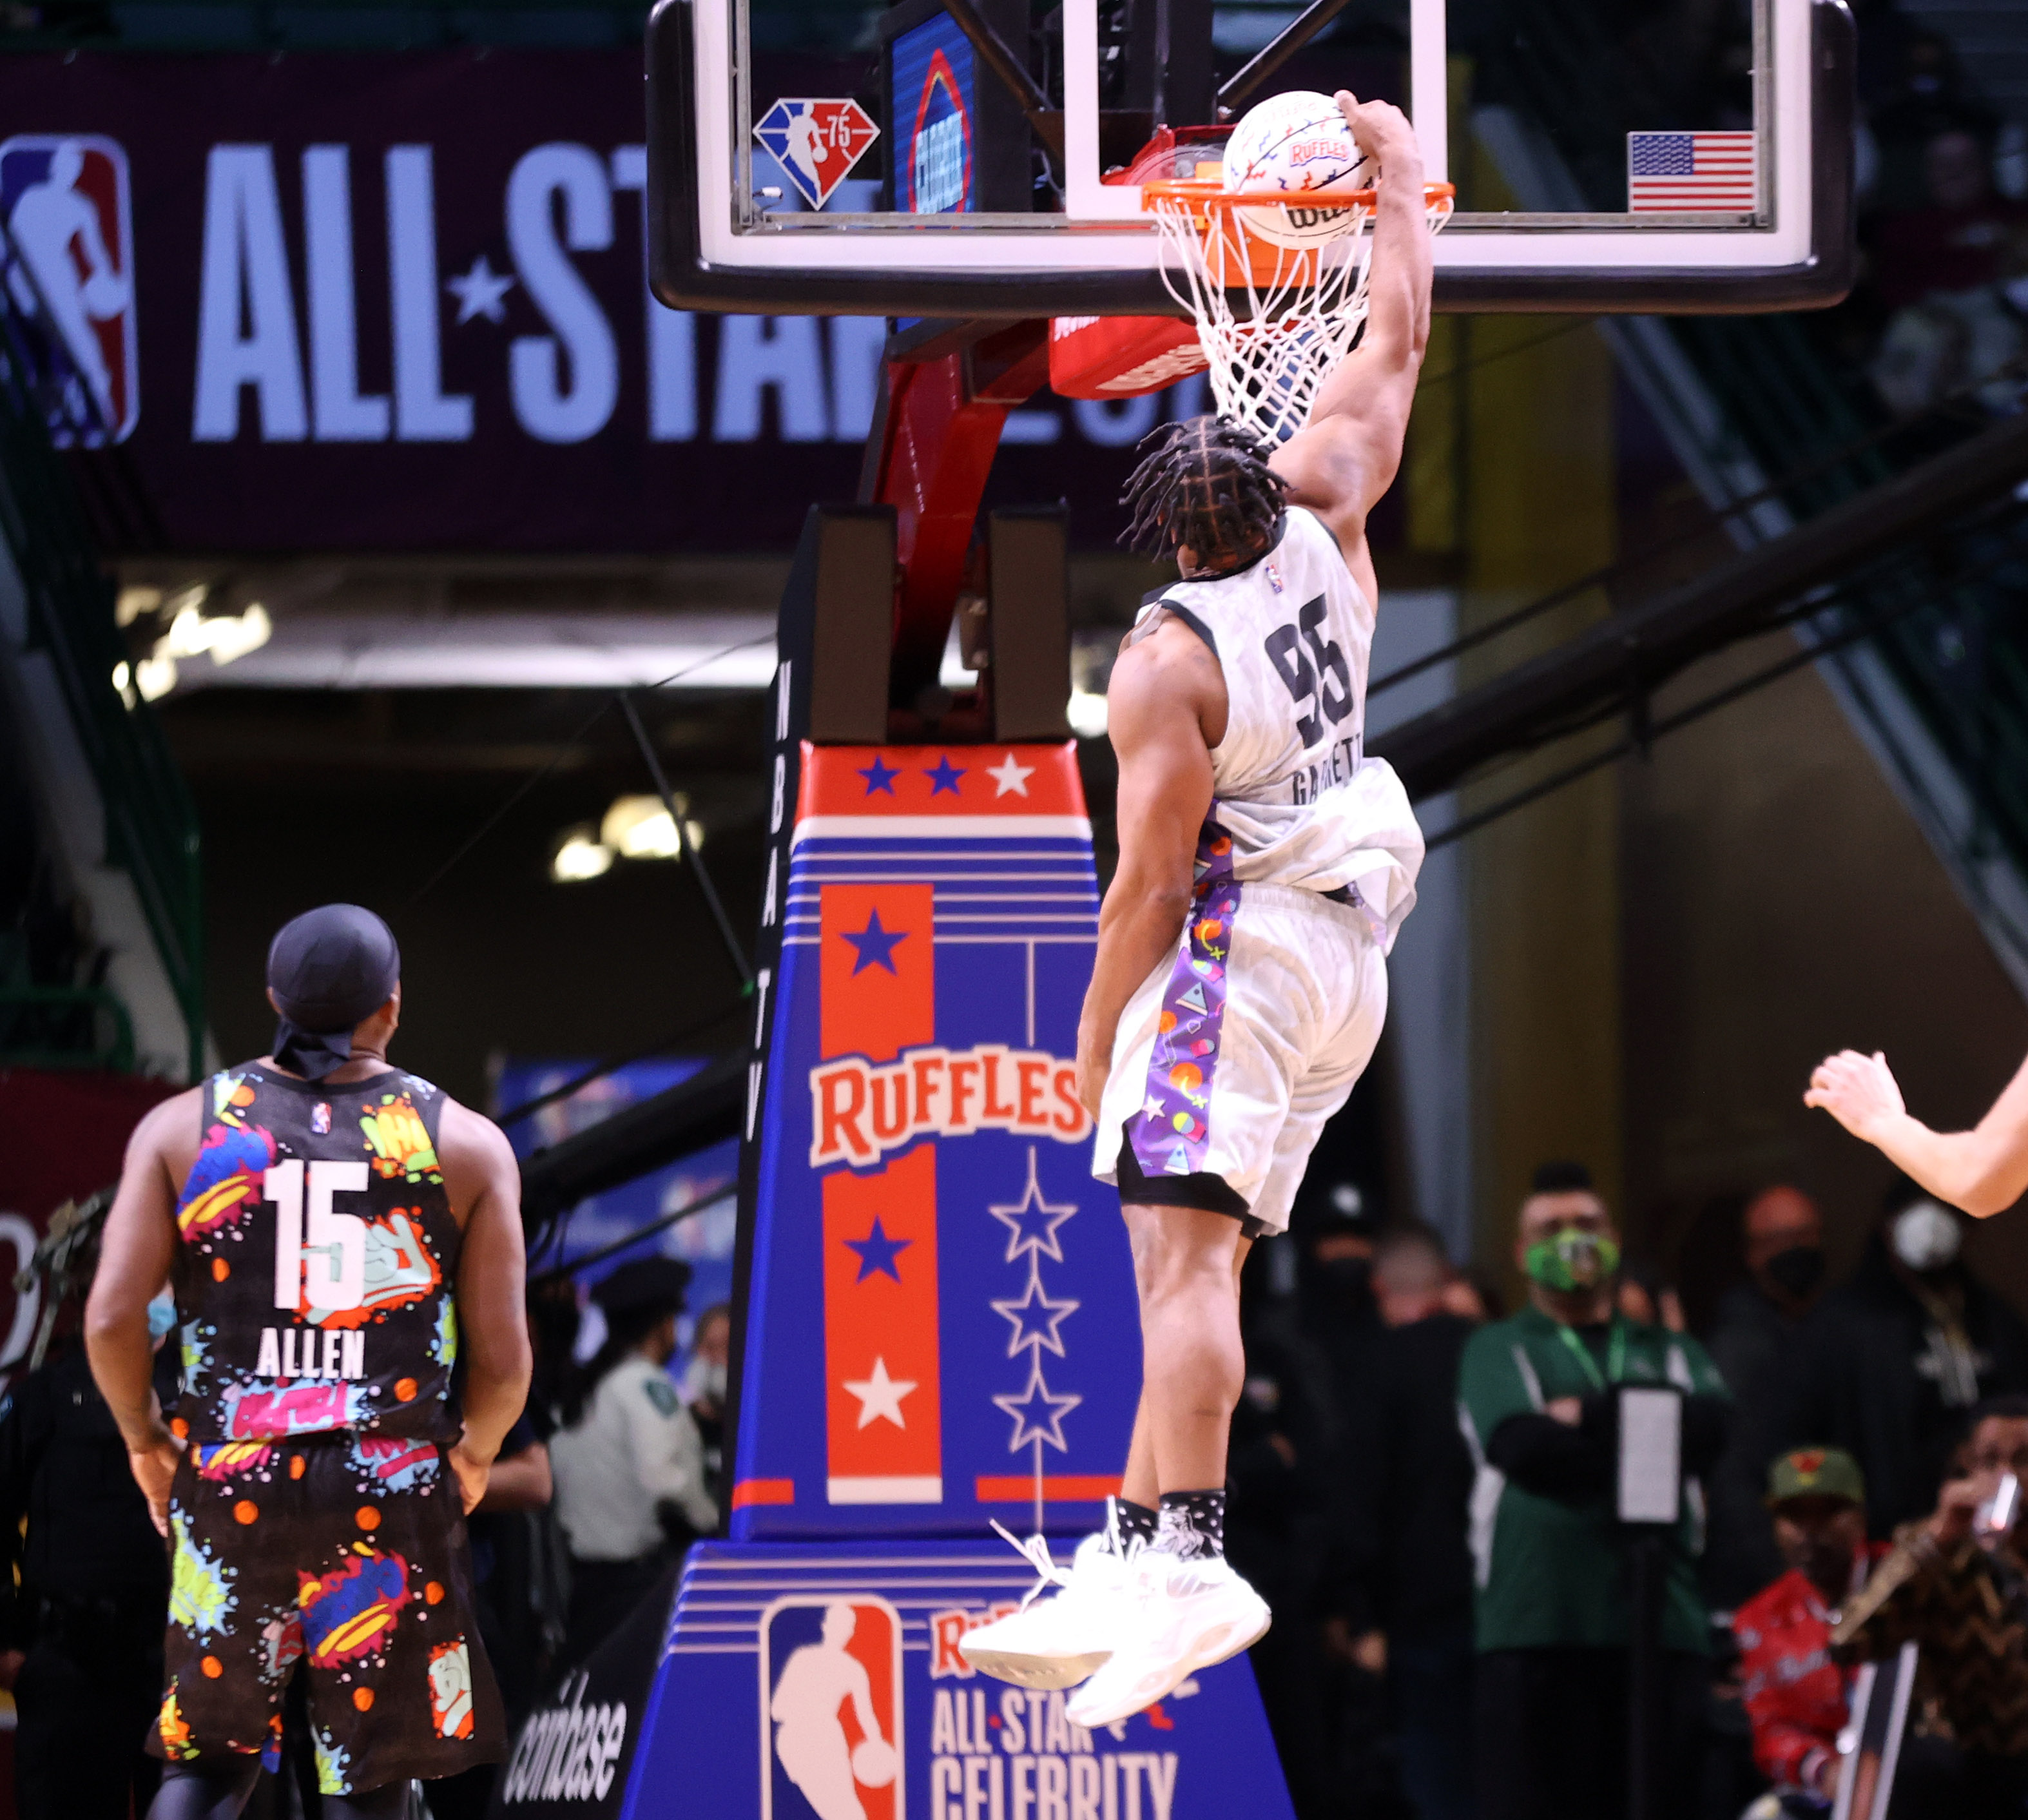 NBA All-Star Weekend: Best Celebrity game dunks in history